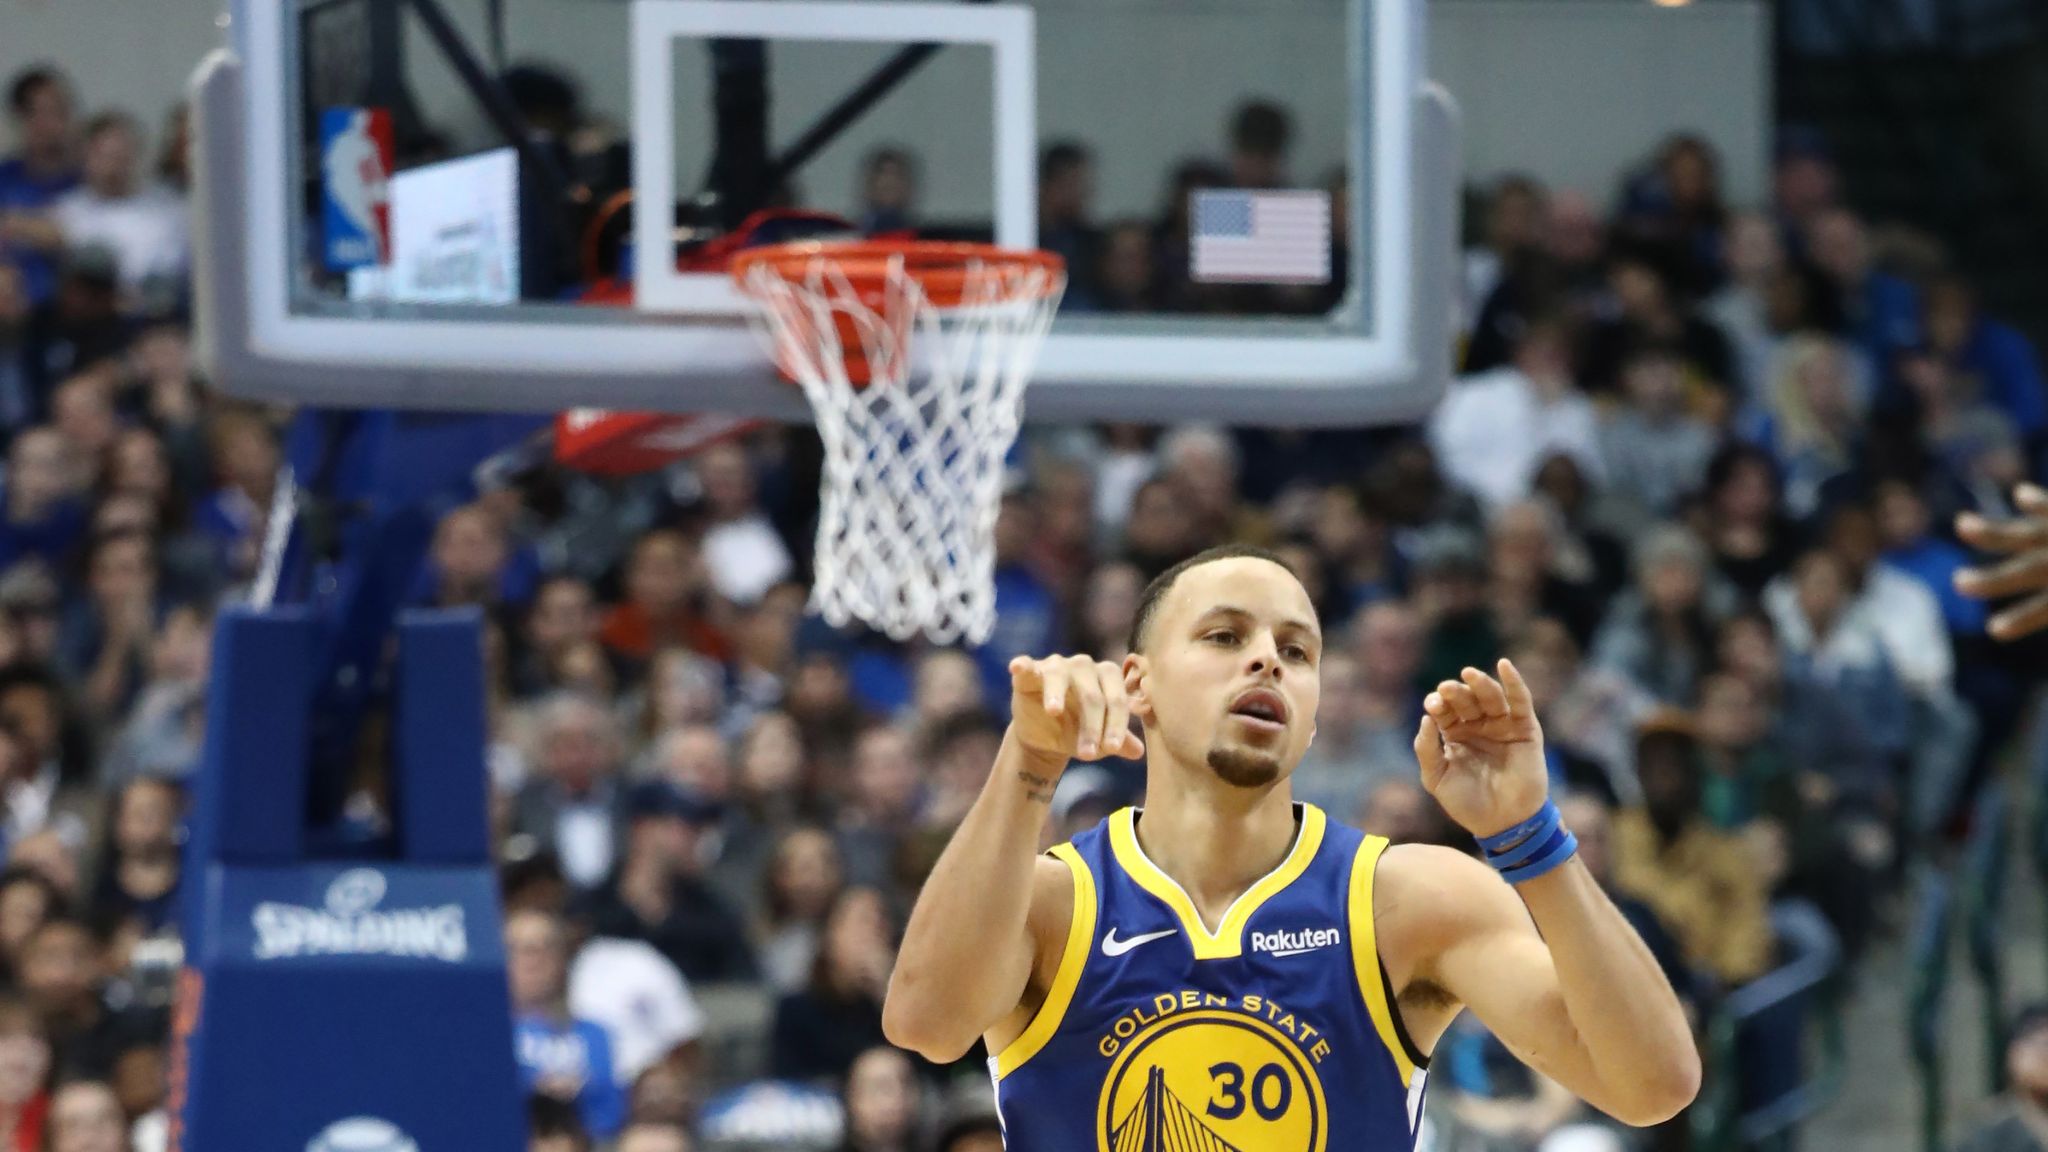 Exhausted Jokic scores 35 points, Nuggets hold off Curry, Warriors 108-105